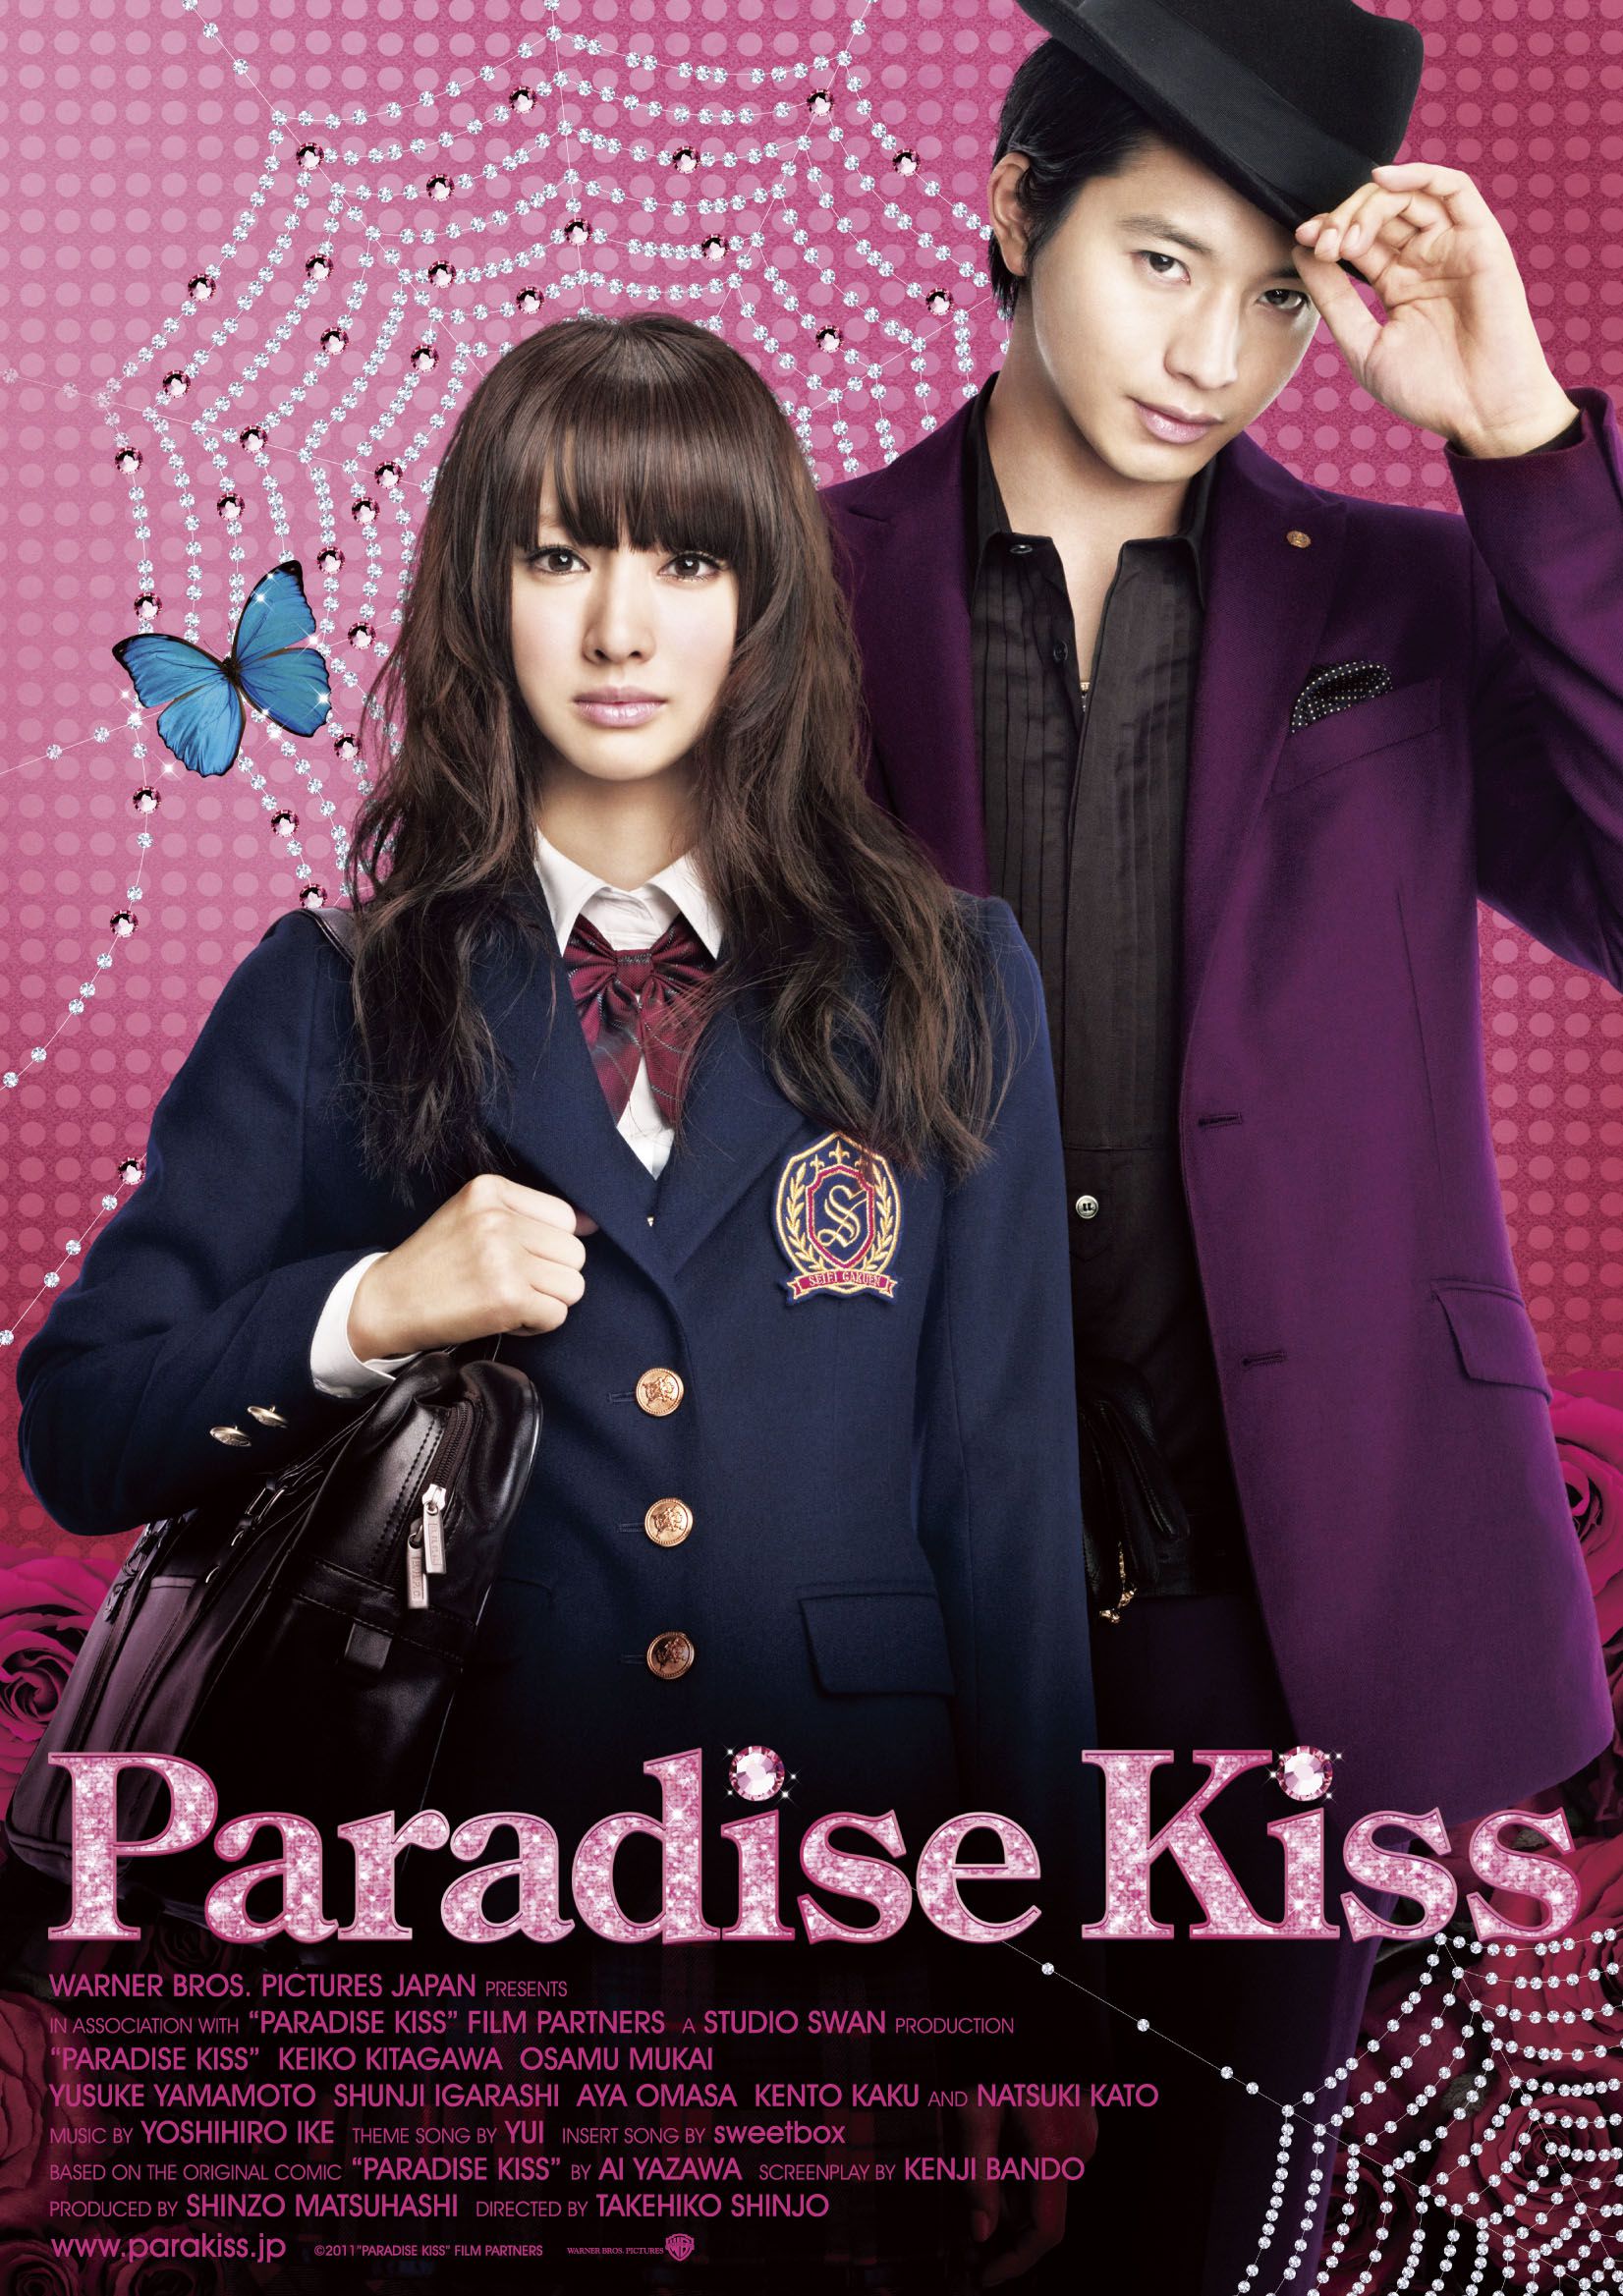 Paradise Kiss - Film (2011) streaming VF gratuit complet